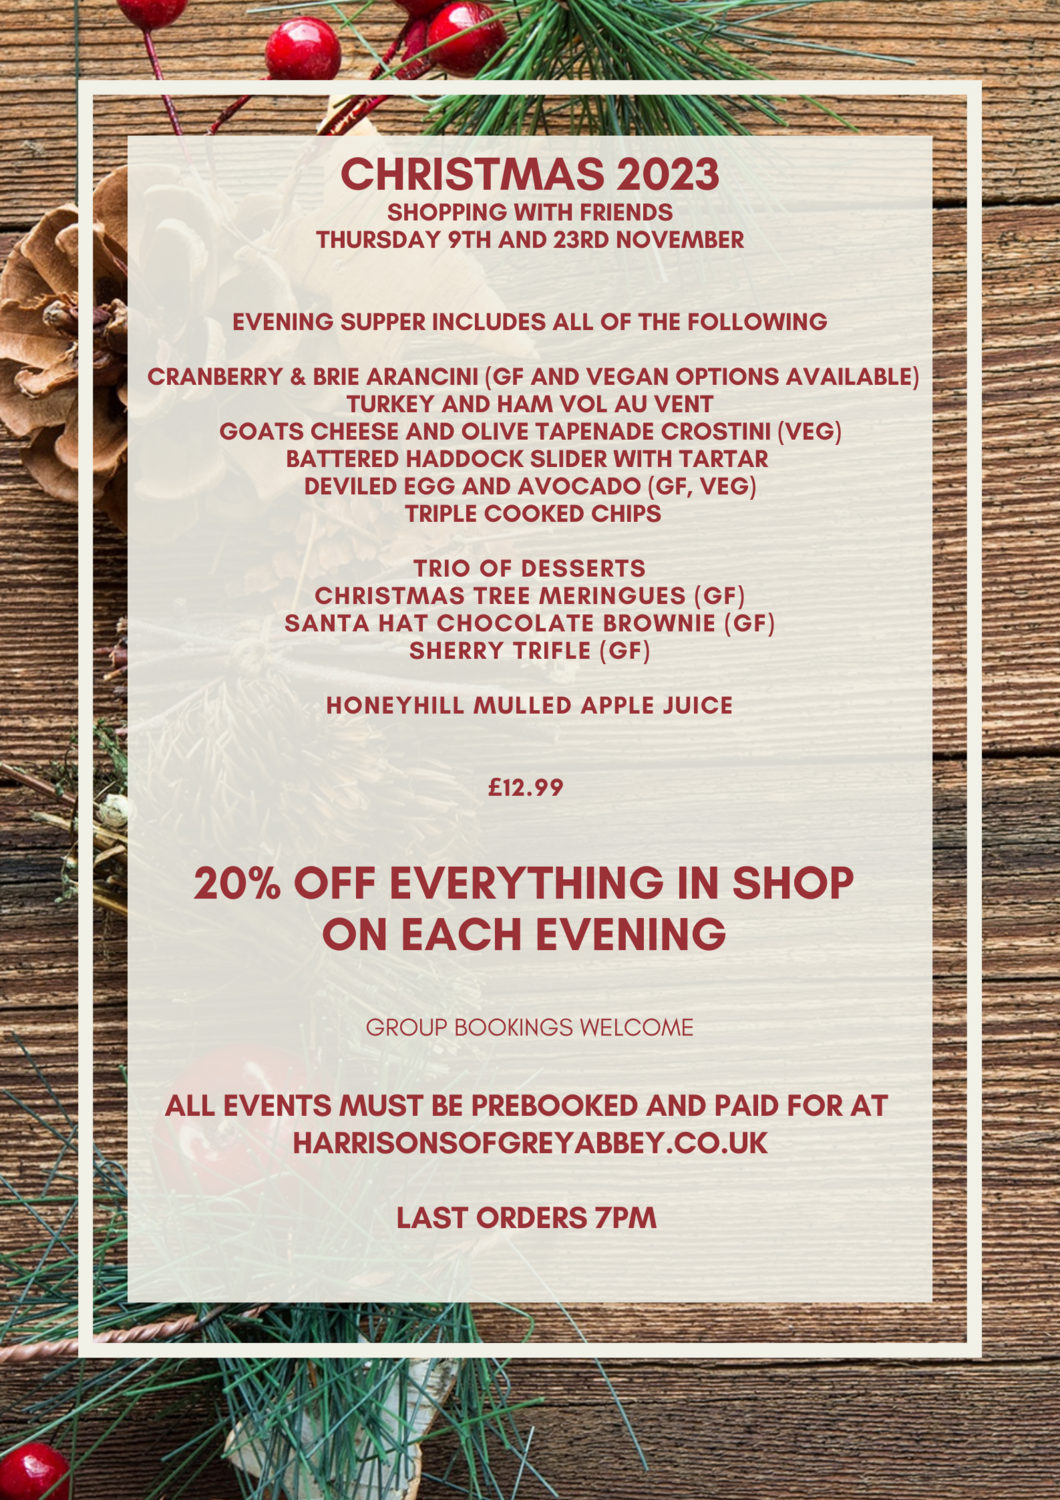 Shopping with friends
Thurs 23rd November (SOLD OUT)